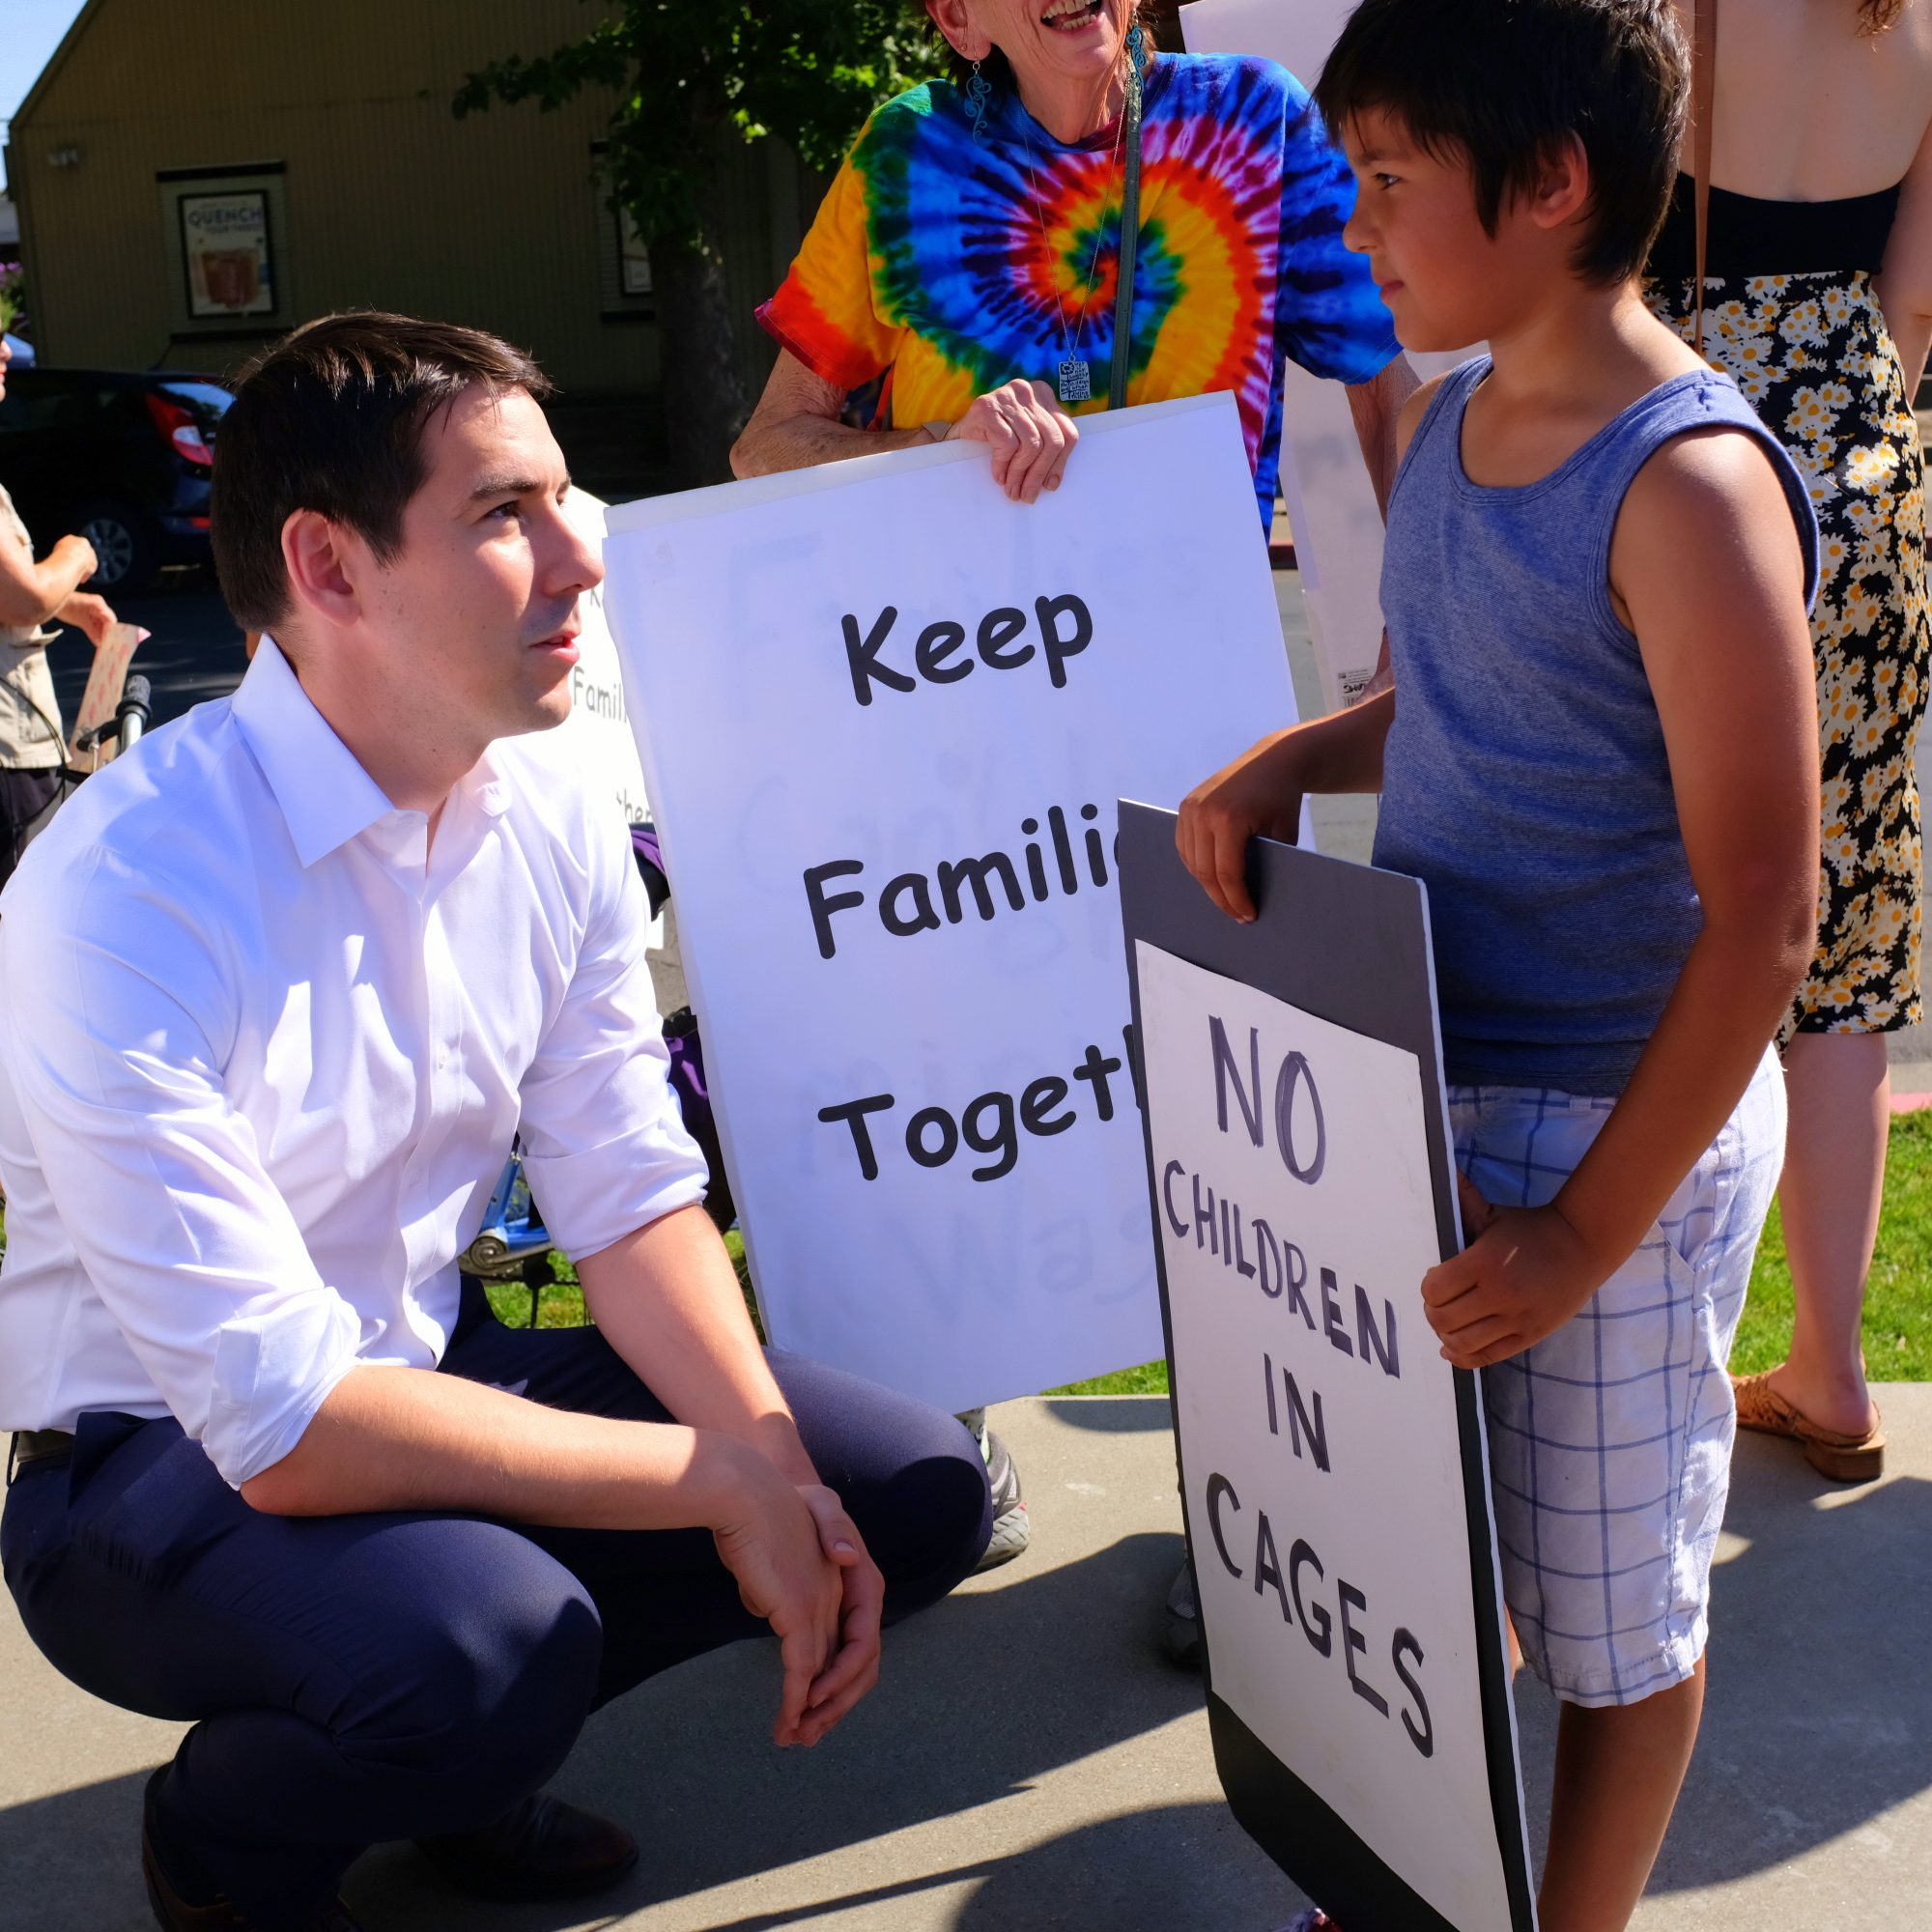 Josh Harder with boy holding sign, "No Children in Cages"